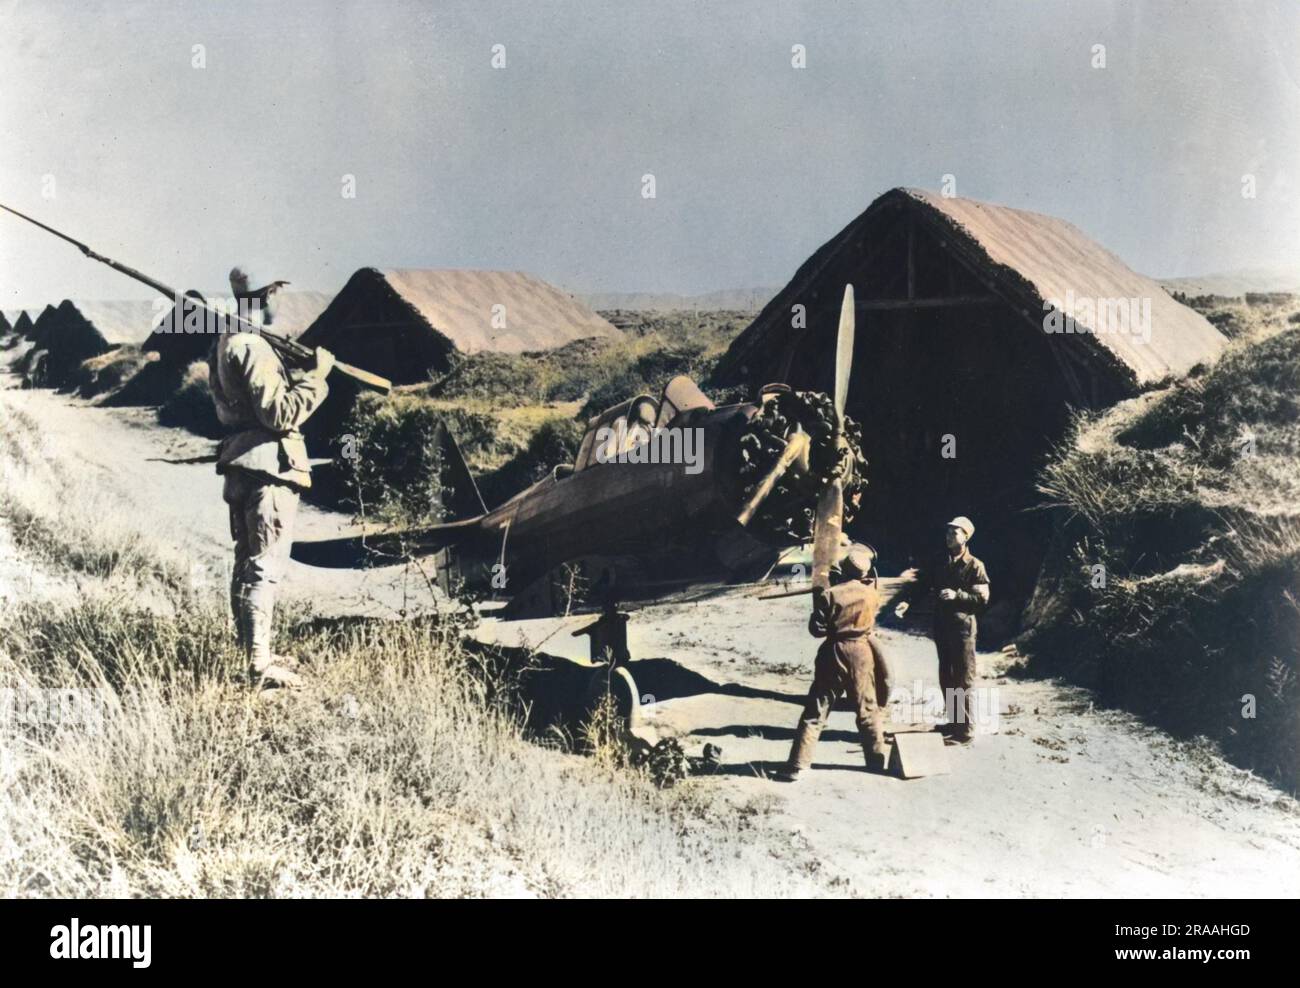 With a Chinese soldier standing guard, repair work on a U.S. fighter plane is carried out somewhere in China. The camouflaged huts in the background act as cover for the American planes     Date: 1943 Stock Photo